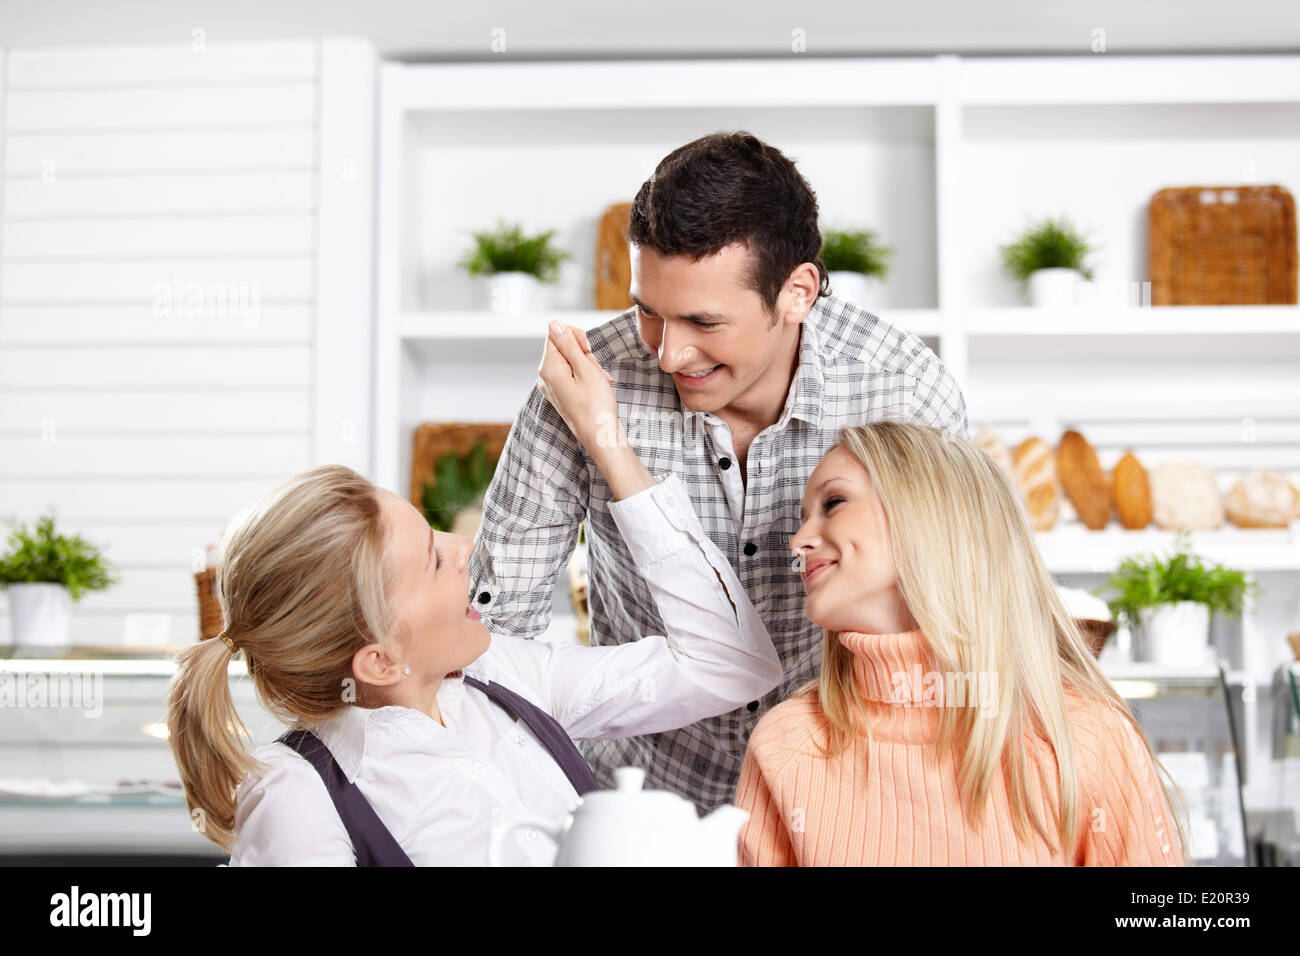 Two girls and the guy have fun in cafe Stock Photo